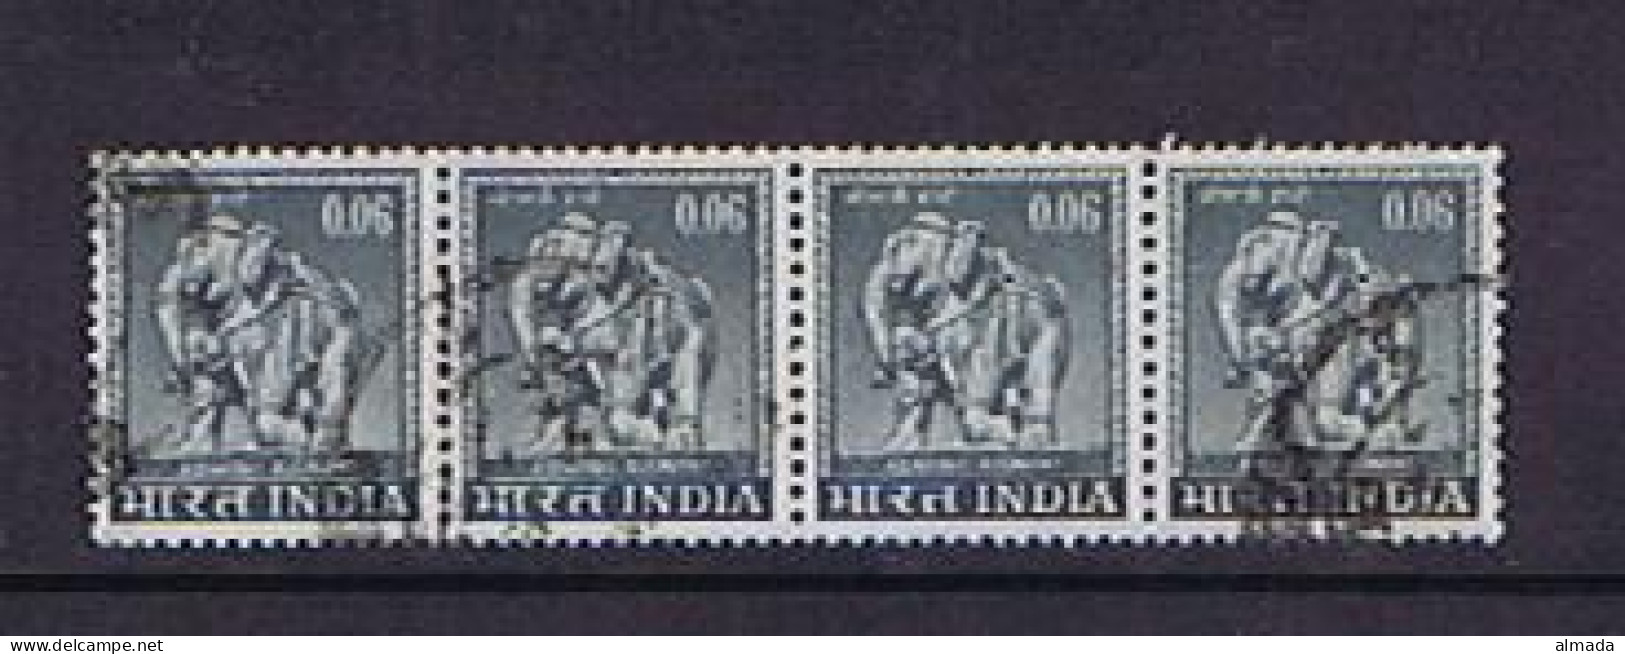 Indien 1966: 4x Michel 391 Used, Gestempelt - Used Stamps